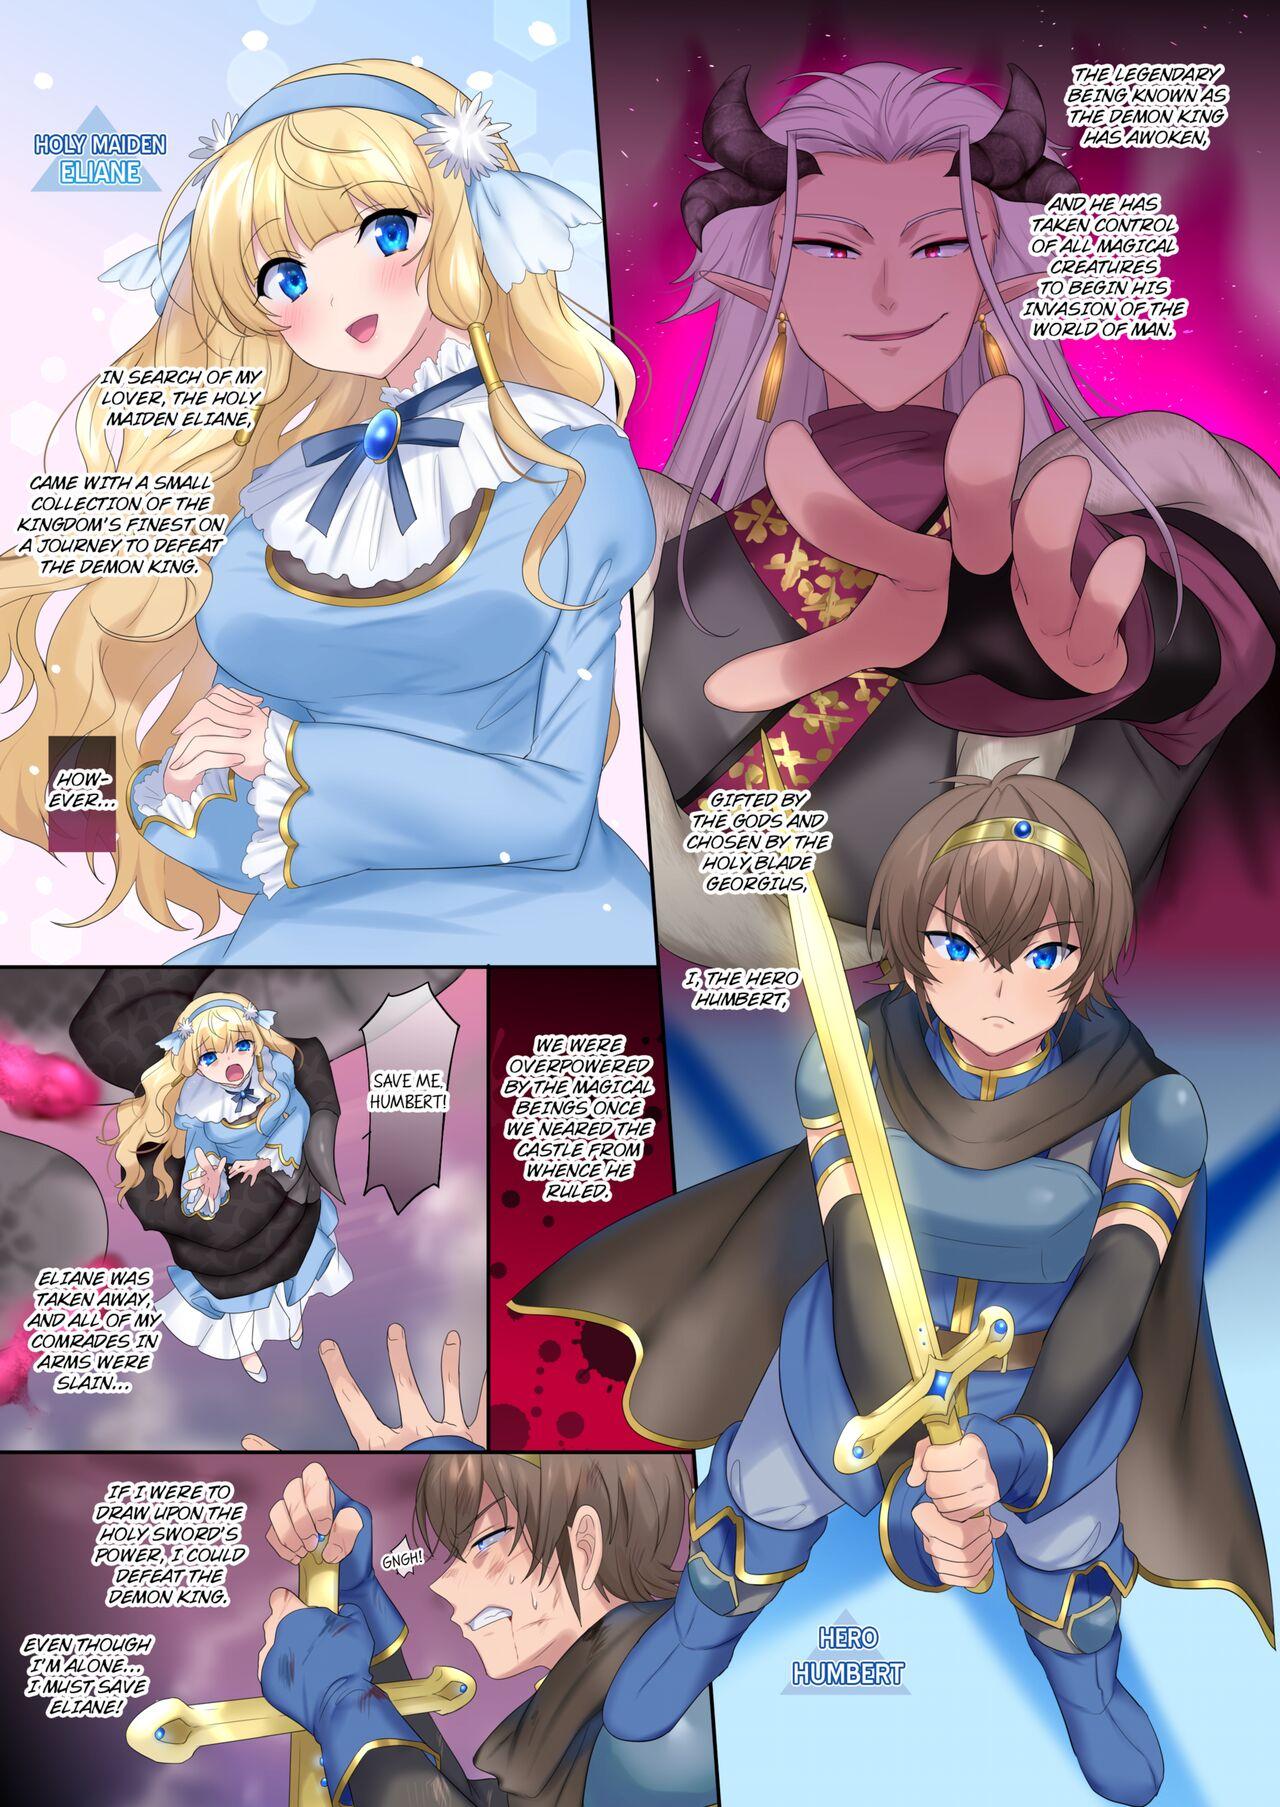 Pay A Hero's Fall from Grace Dragon Princess Pica - Page 3